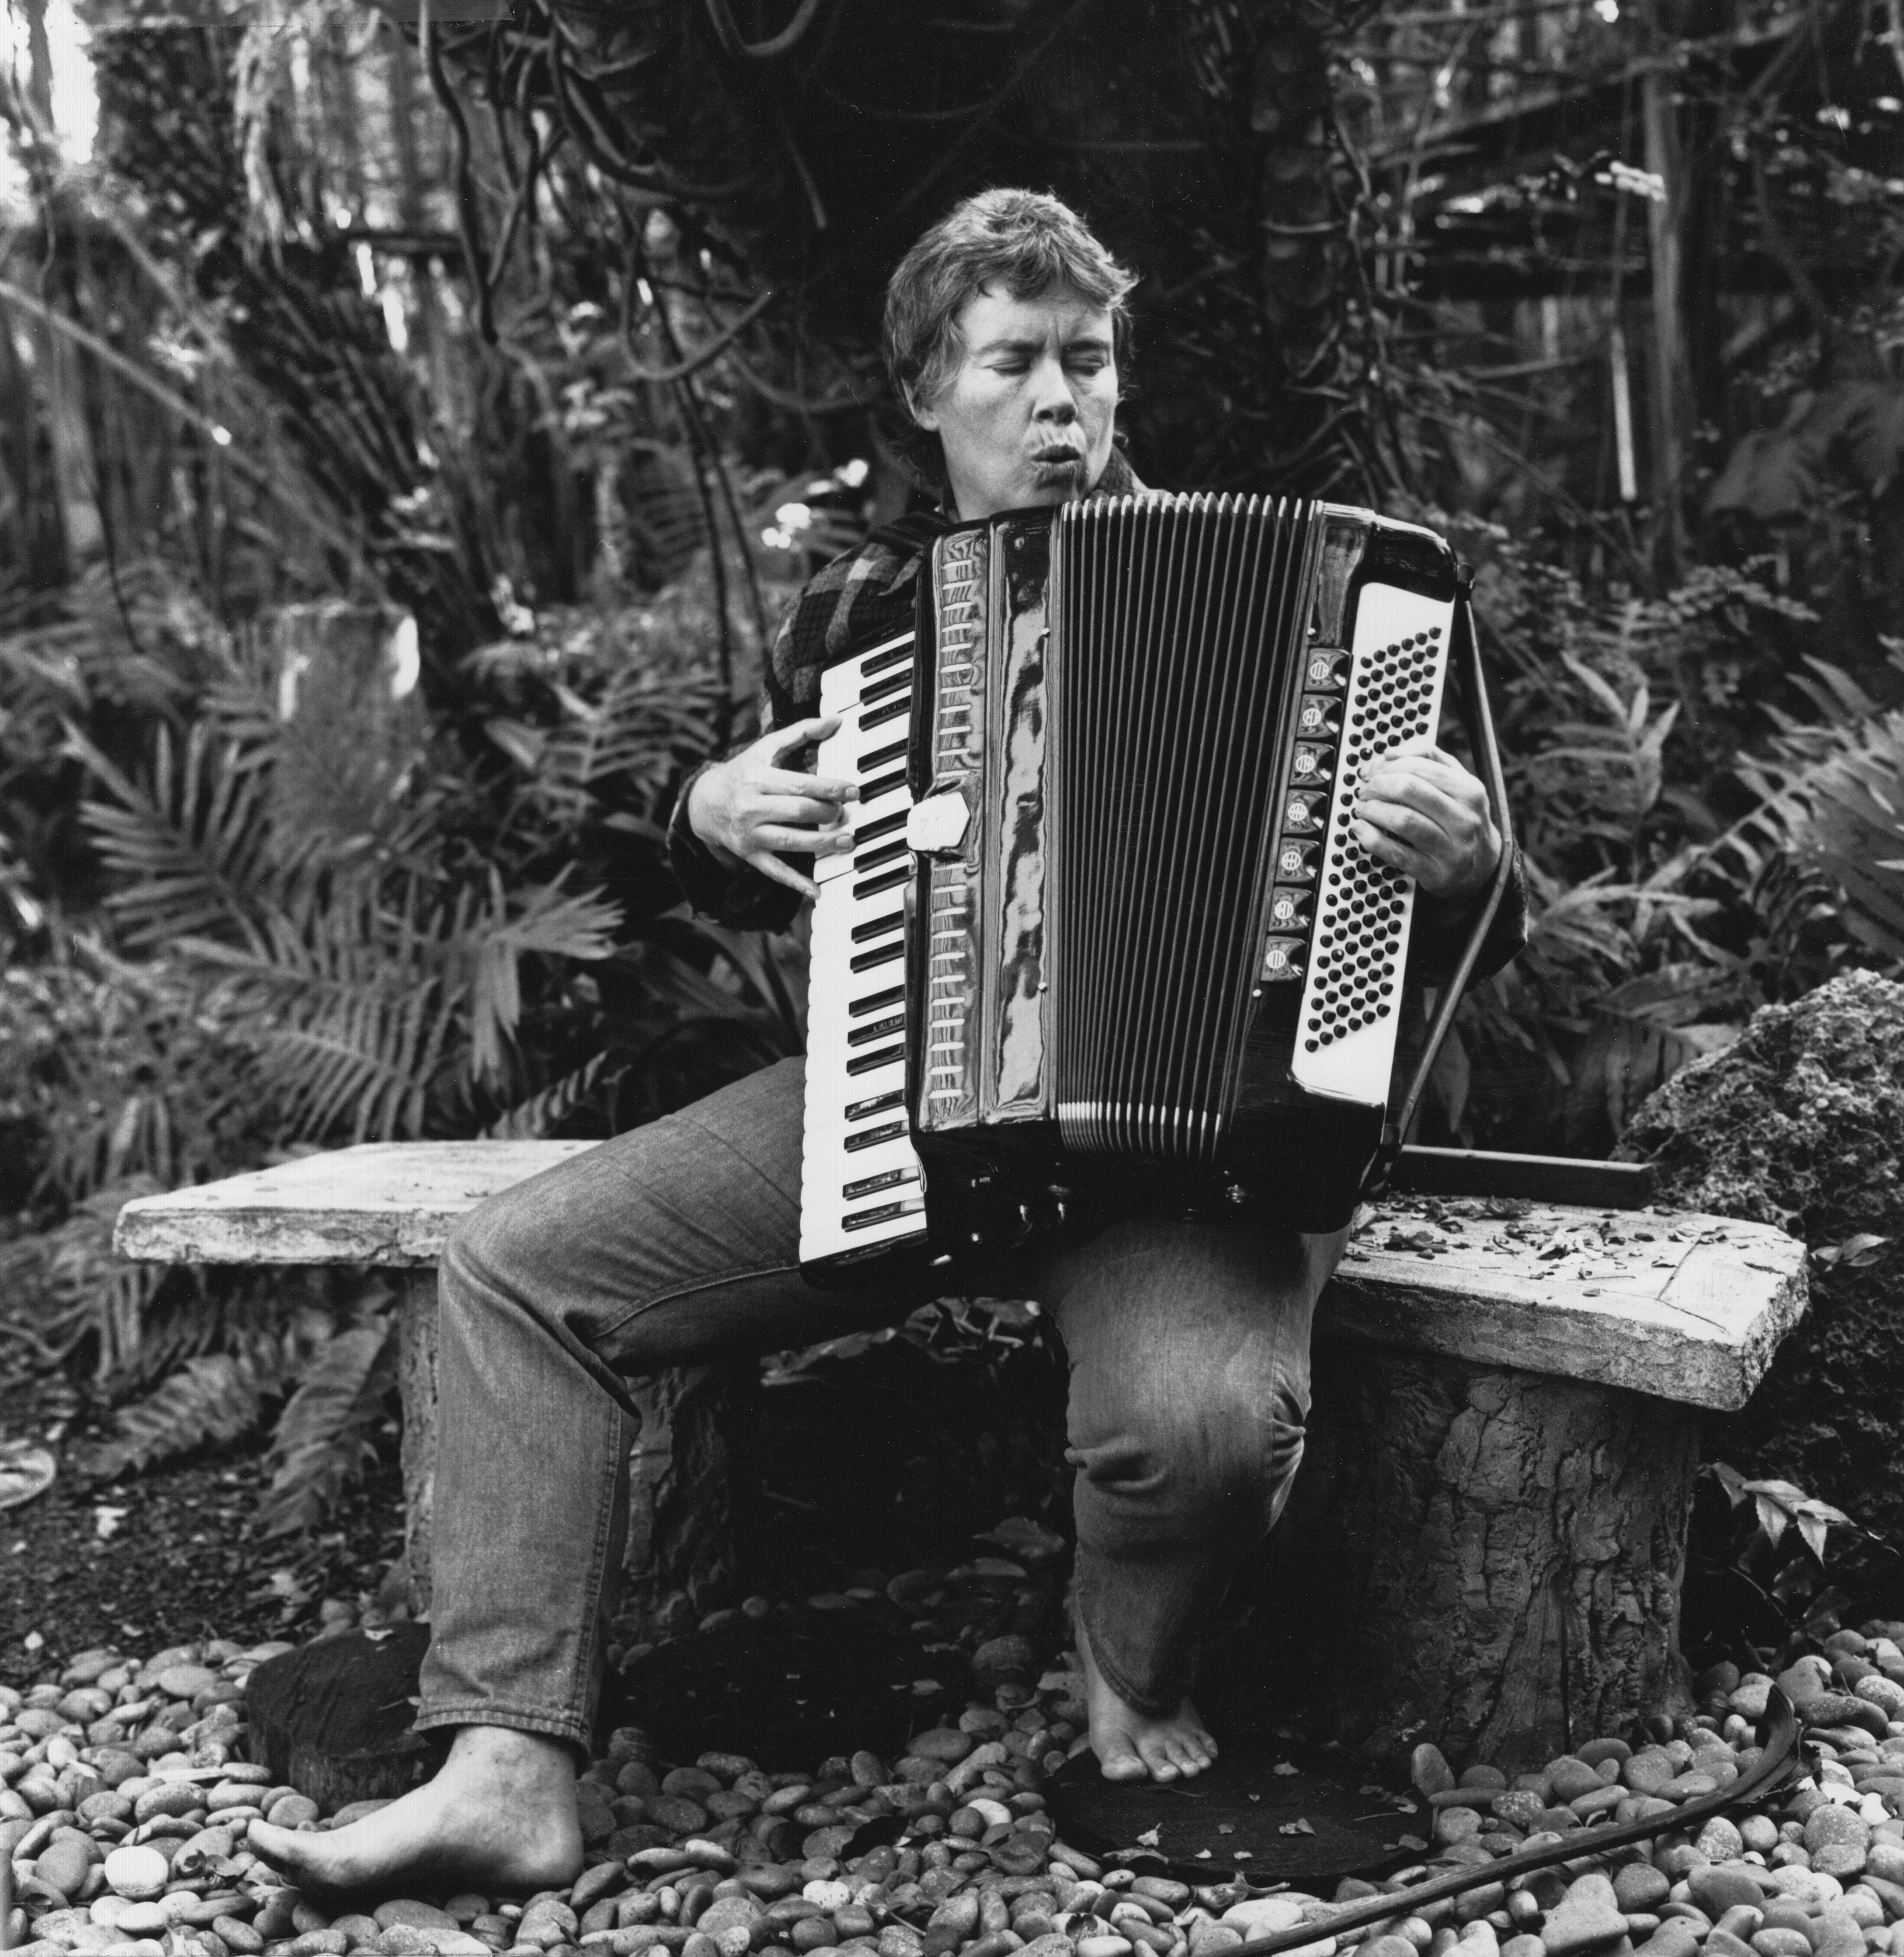 a black and white photograph of musician Pauline Oliveros, taken in 1979, seated on a stone bench, playing their accordion.